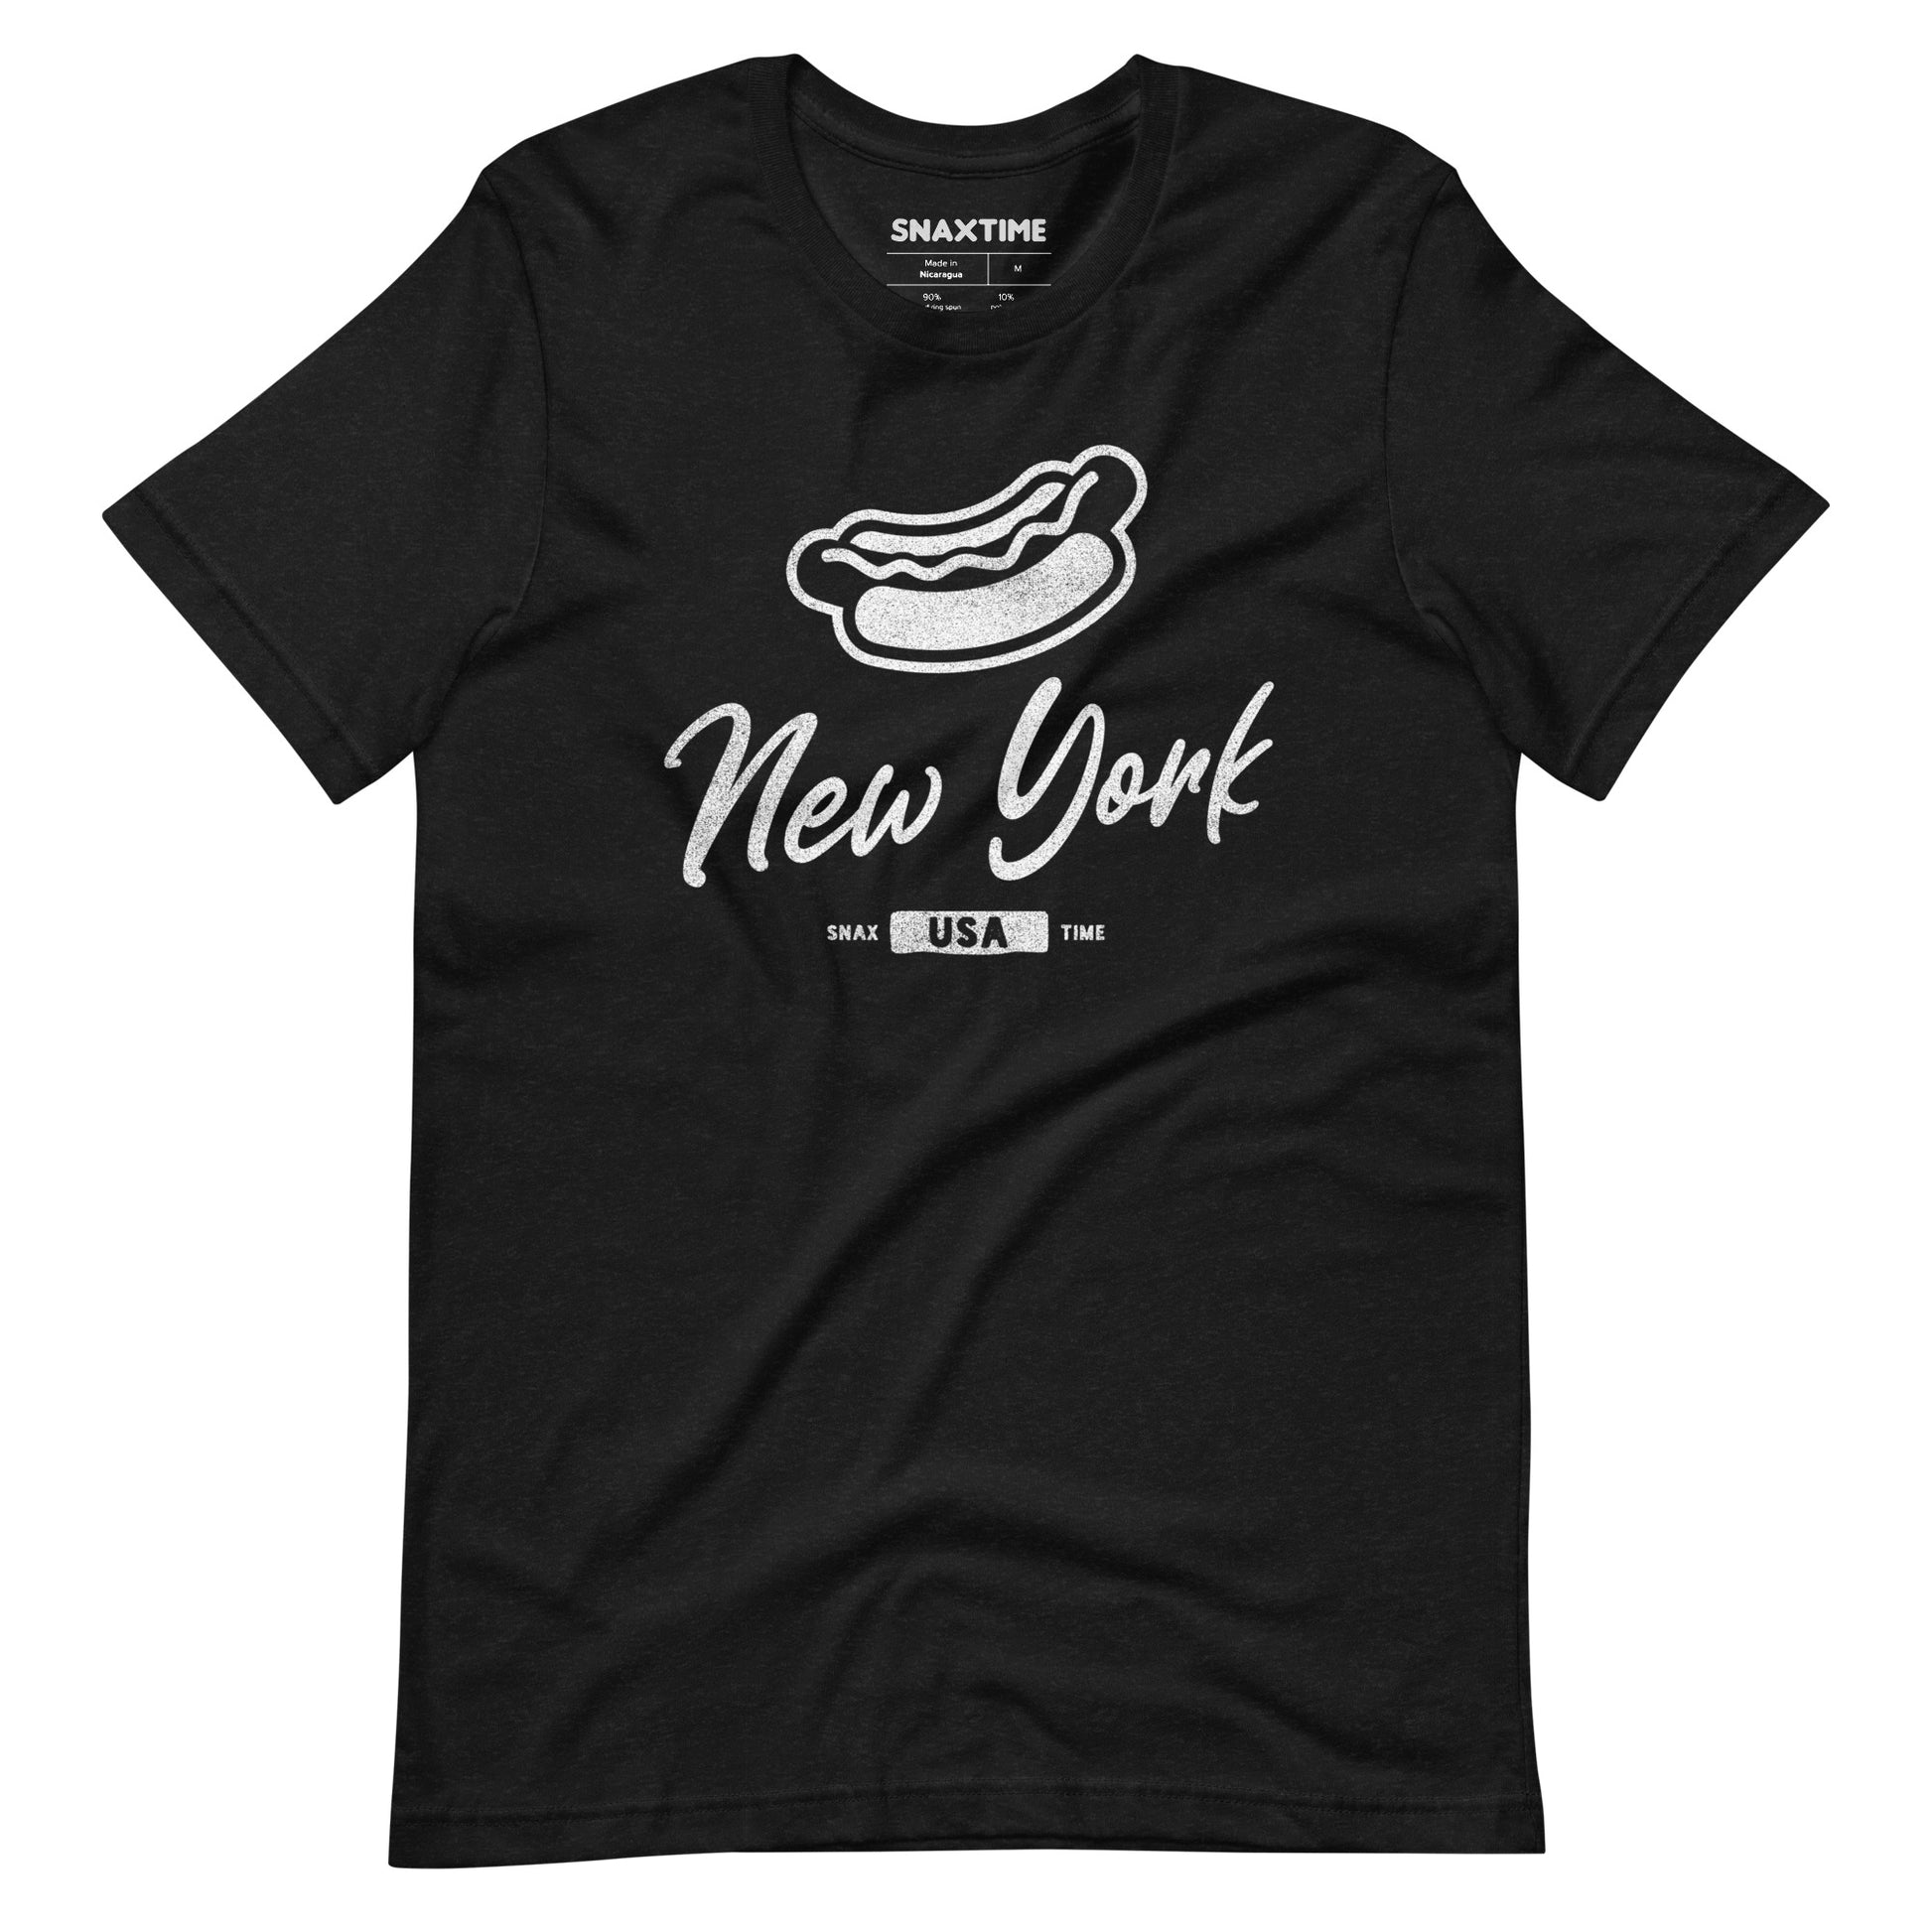 Black Heather New York City Hot Dog Graphic T-Shirt by Snaxtime